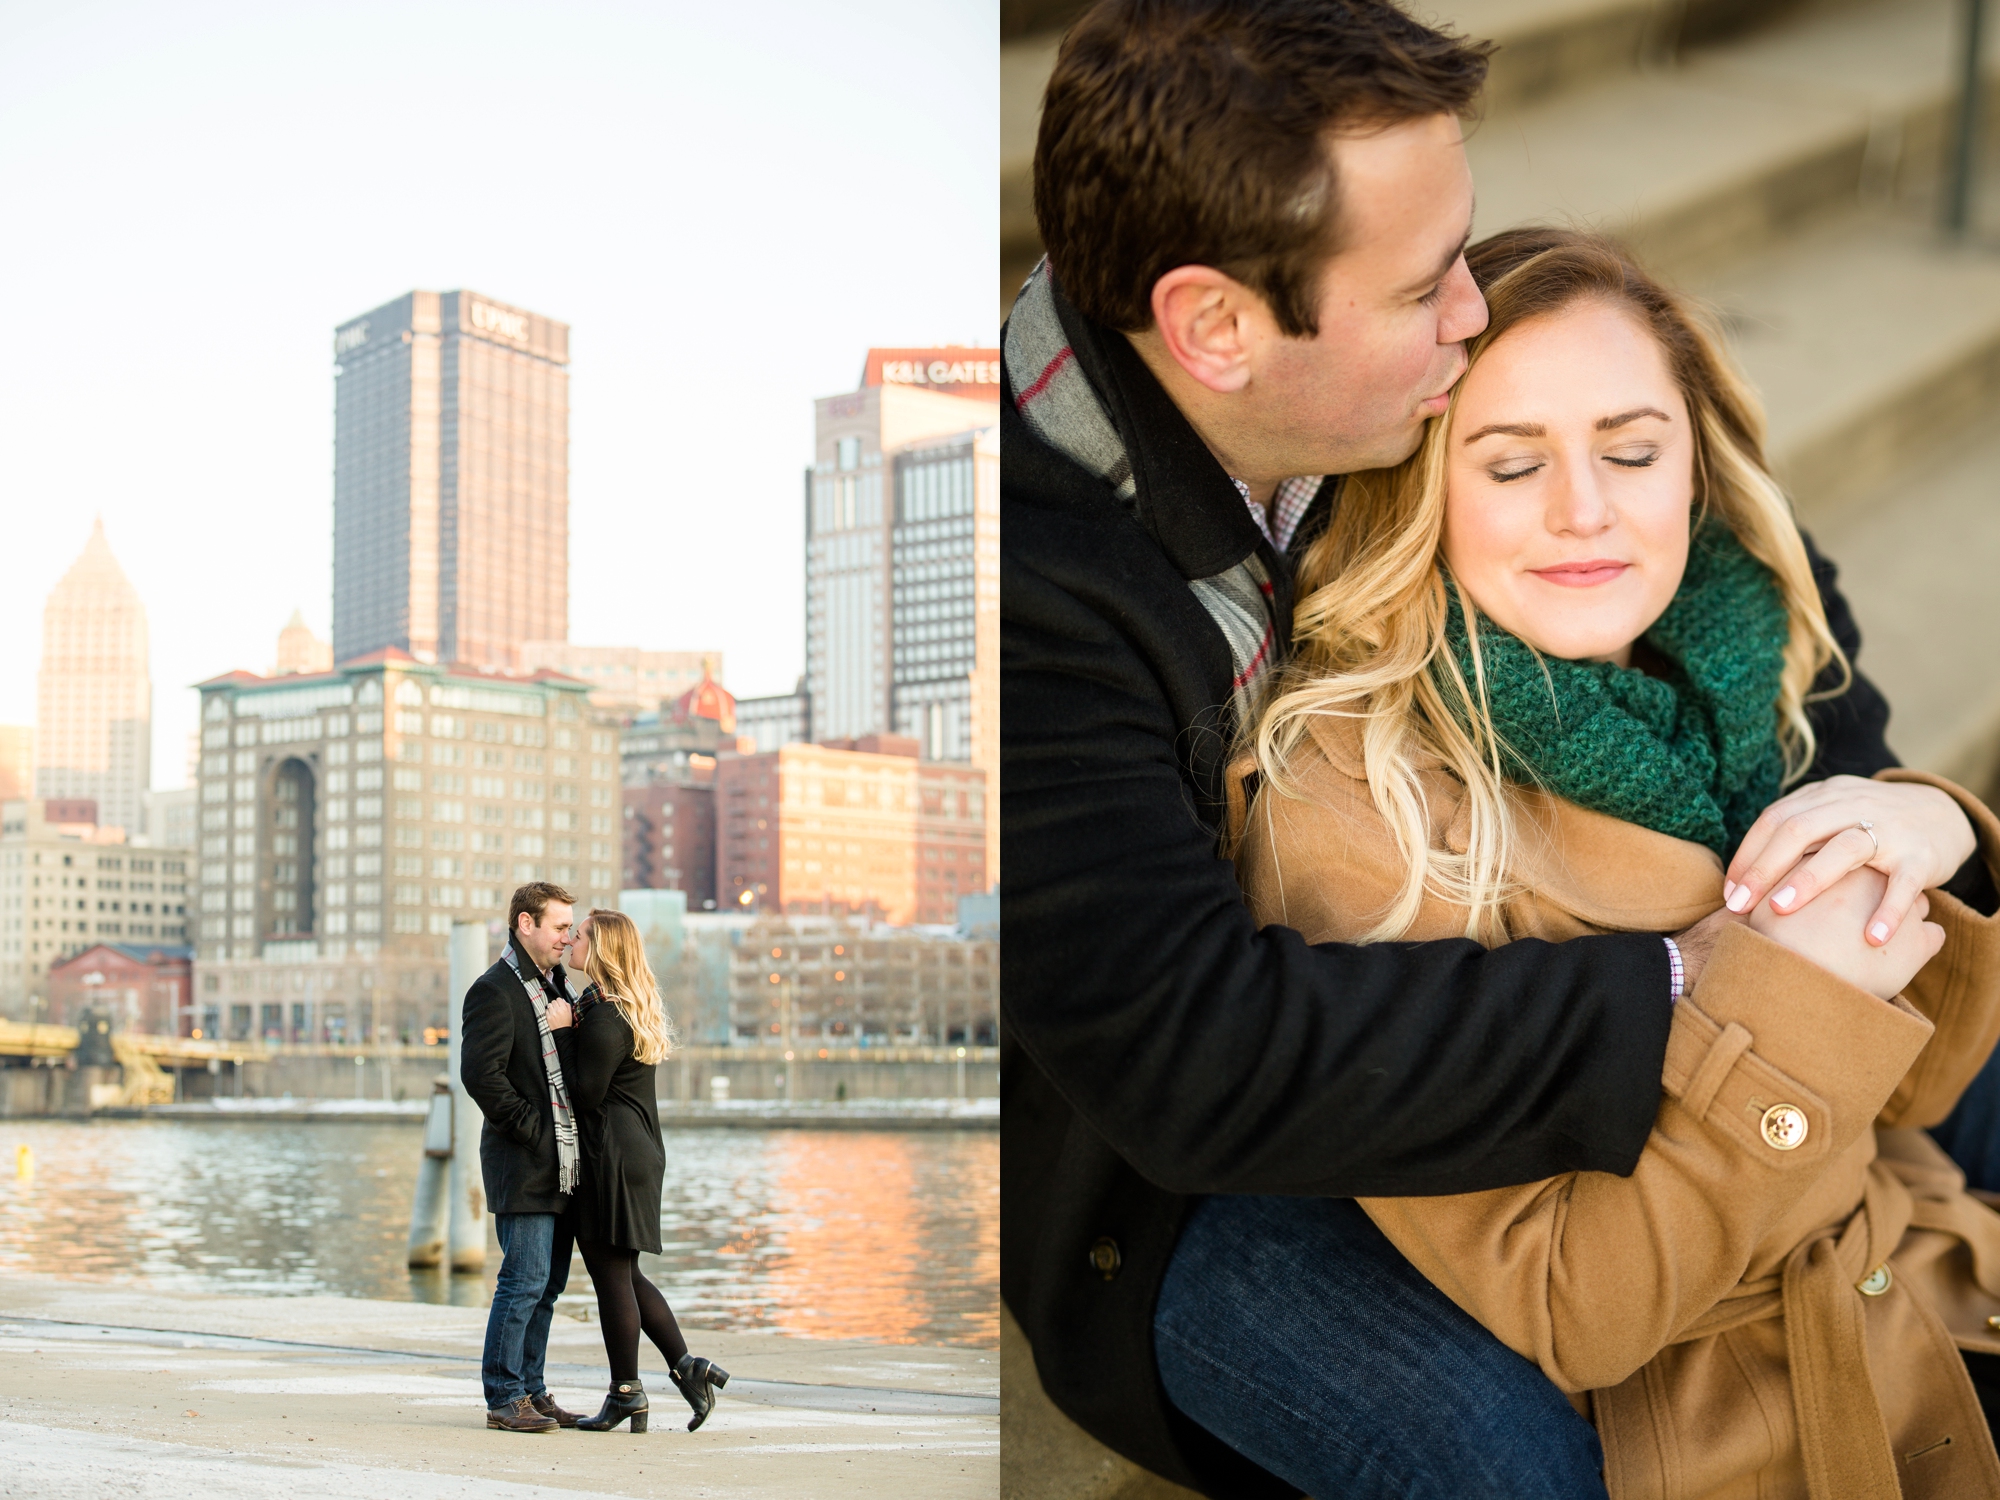 north shore engagement photos, allegheny commons park, mexican war street engagement photos, downtown pittsburgh engagement pictures